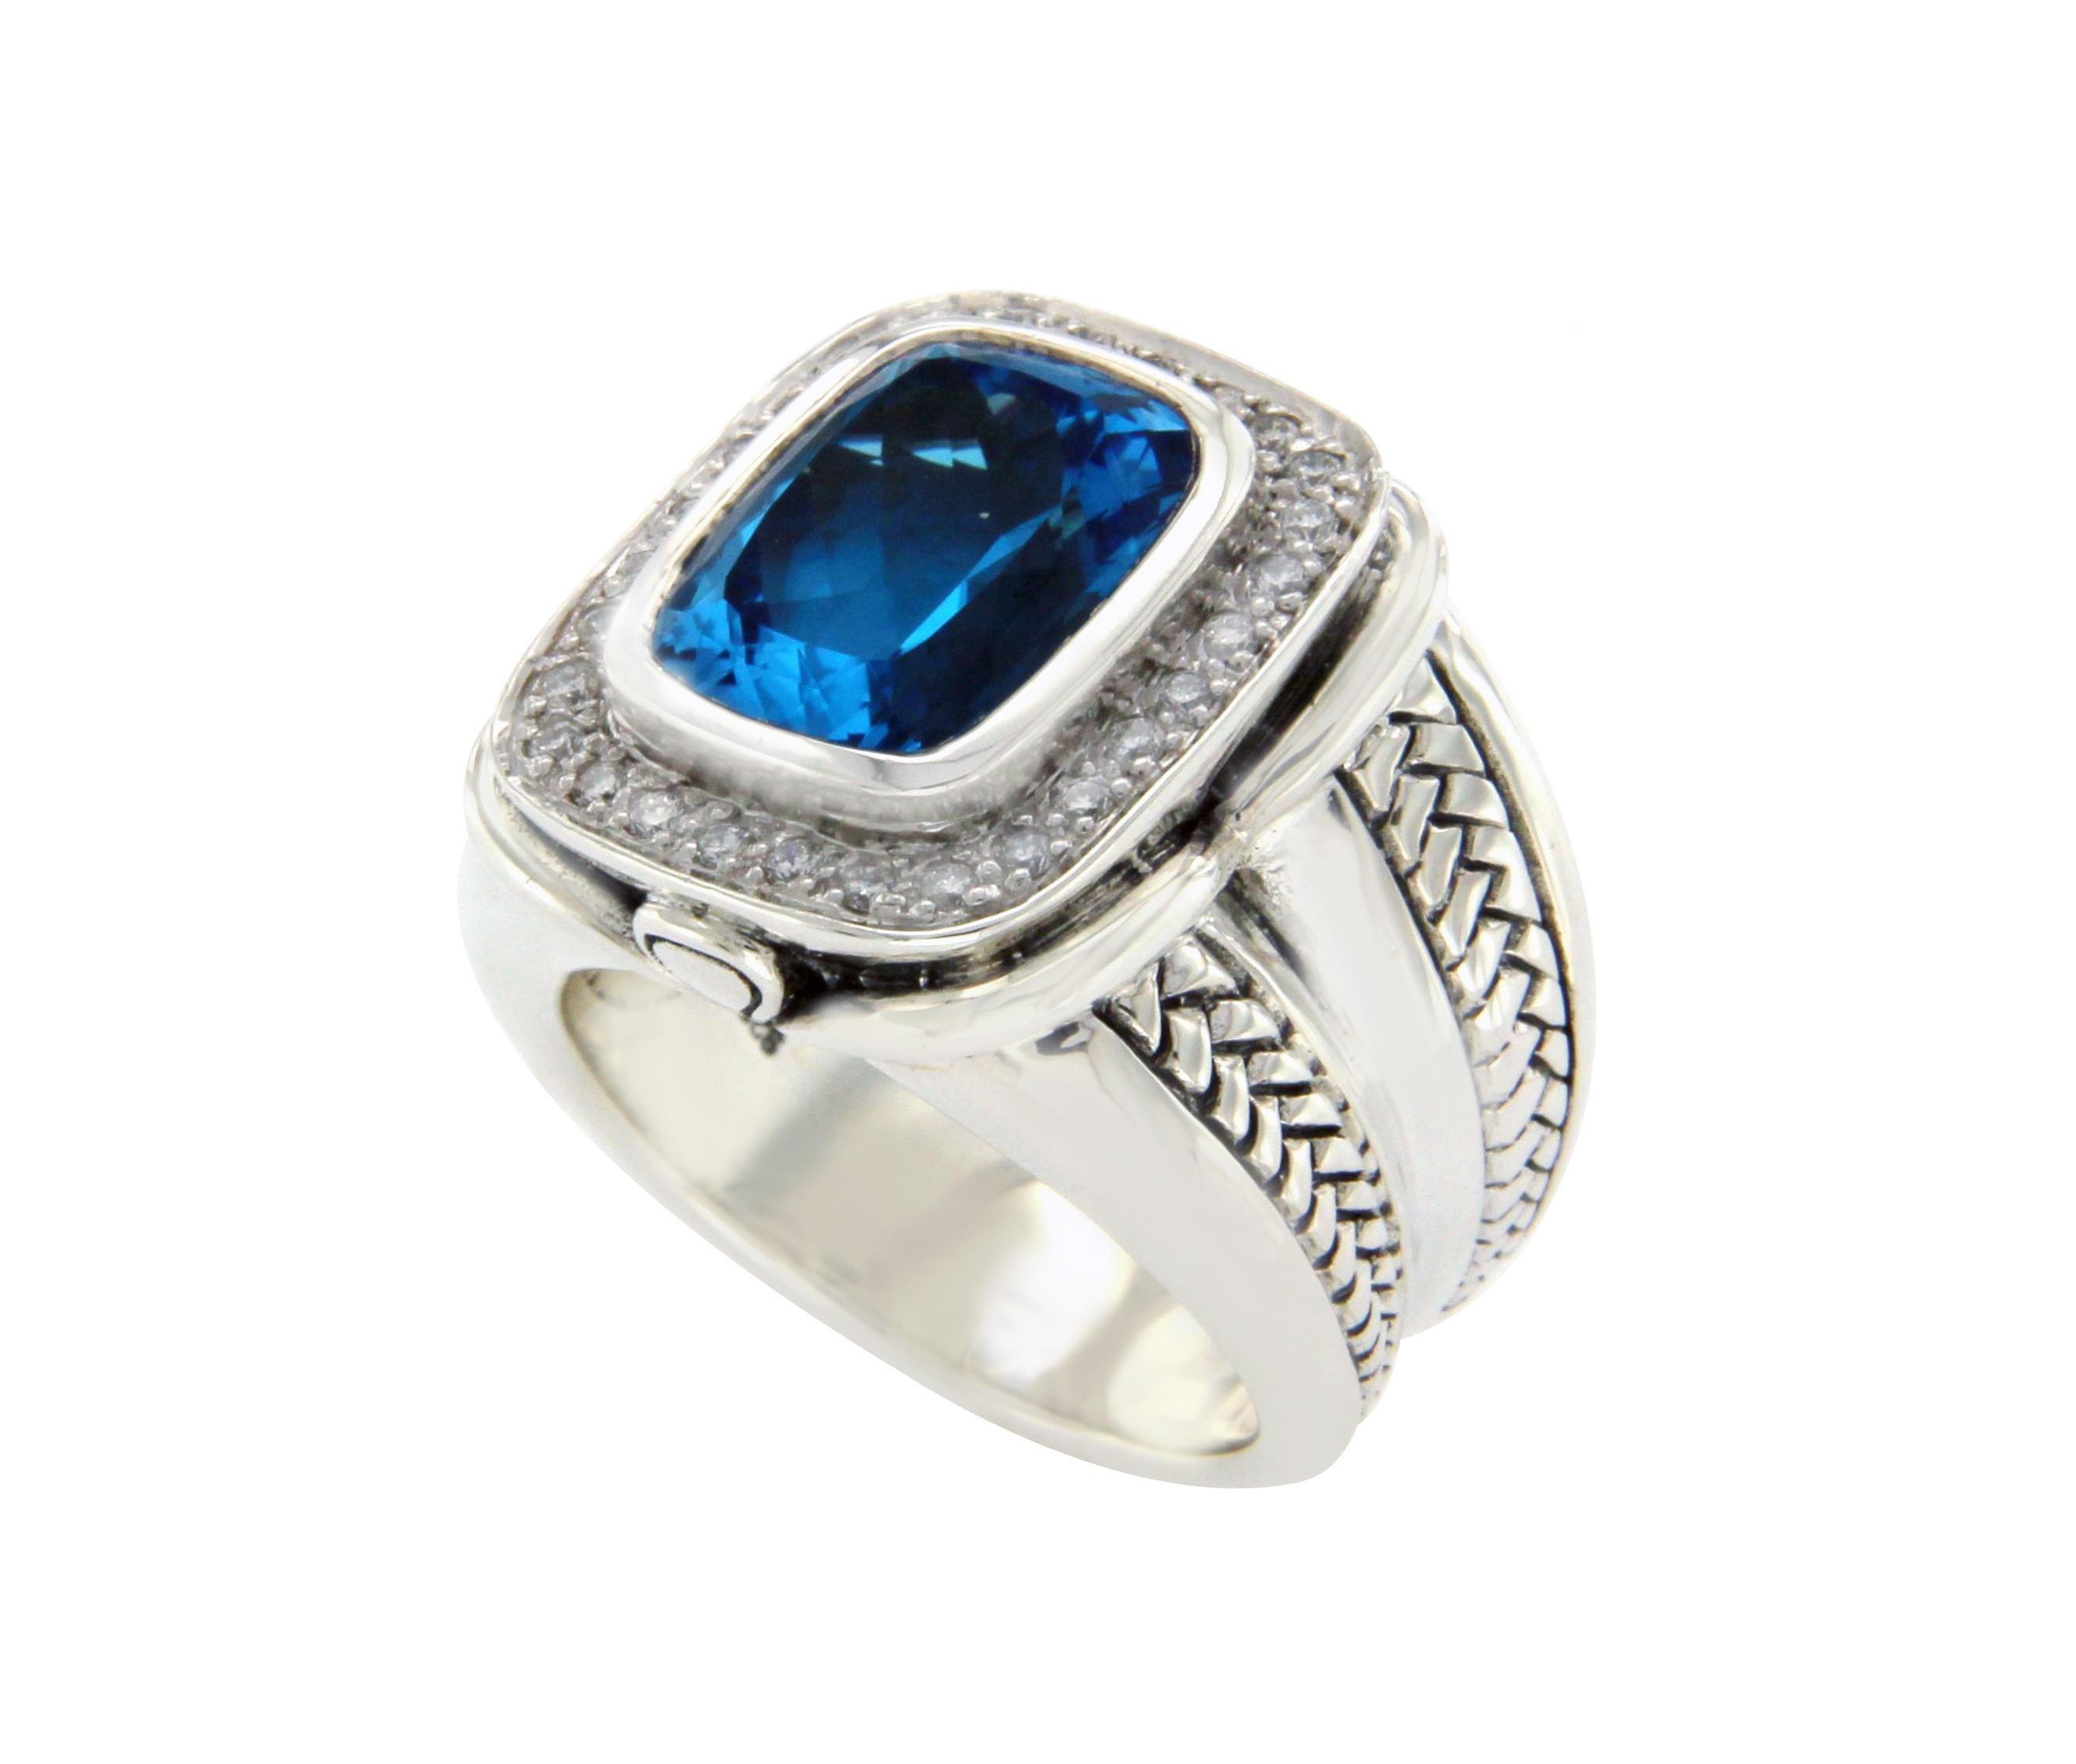 Type: Ring
Top: 19 mm
Size: 6.5
Metal: Sterling Silver
Metal Purity: 925
Hallmarks: S K 925 
Total Weight: 15.5 Gram
Stone Type: Diamonds & Blue Topaz 
Condition: Per Owned
Stock Number: U412